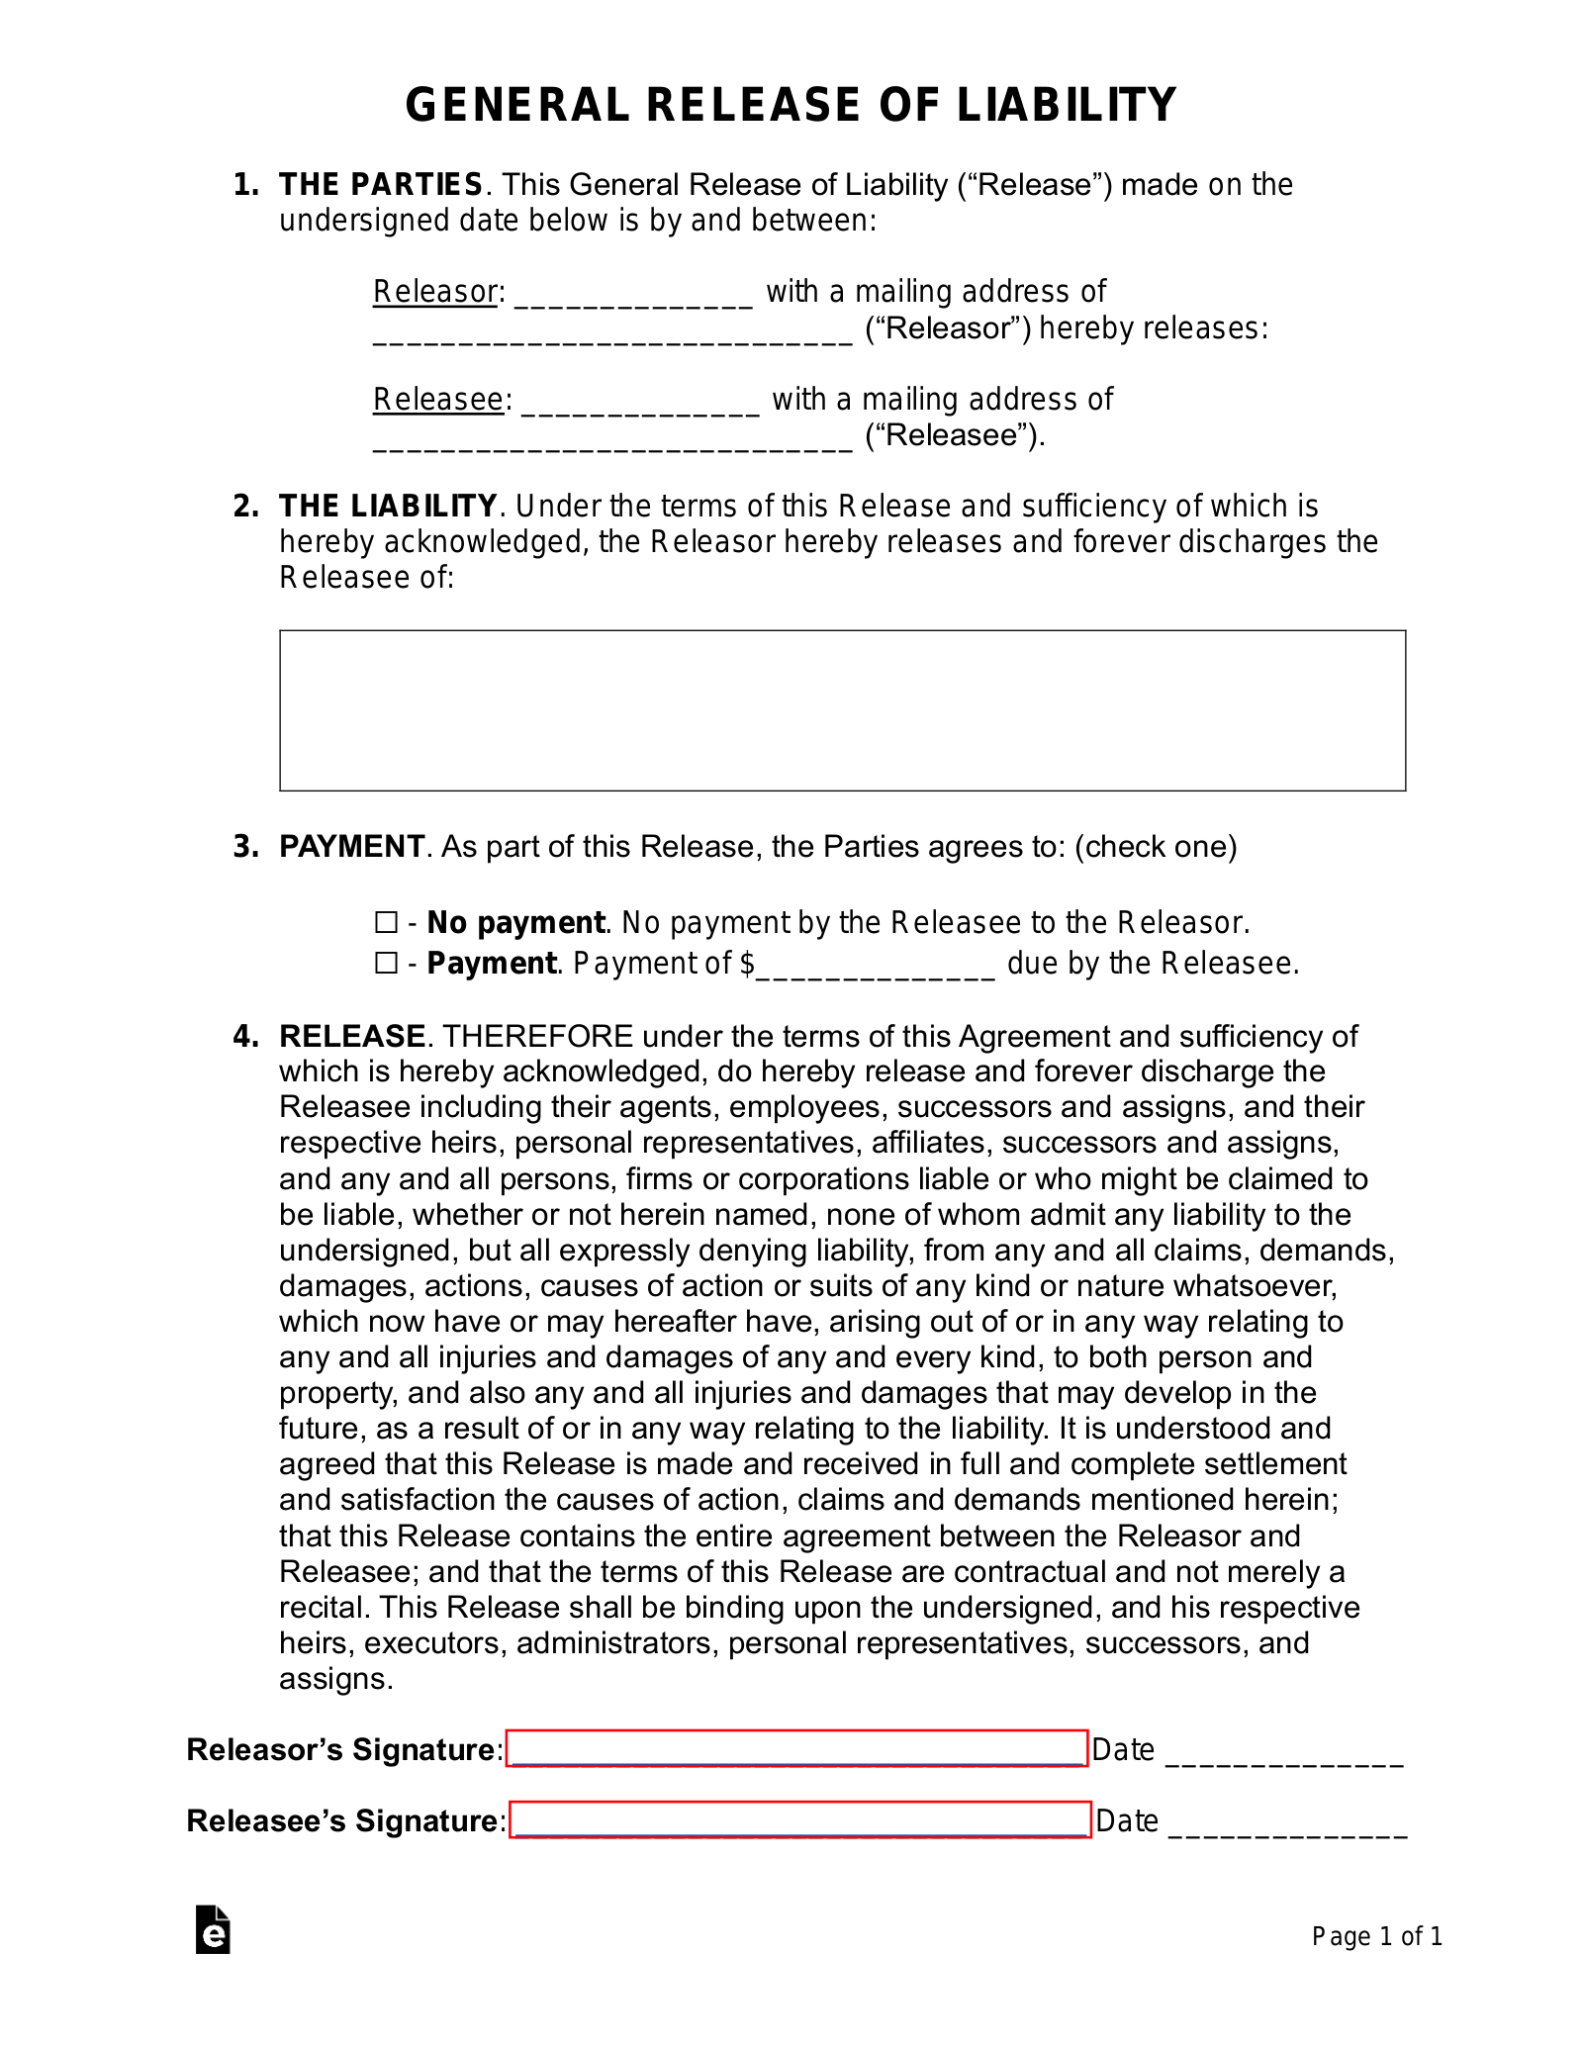 free-release-of-liability-forms-12-word-pdf-eforms